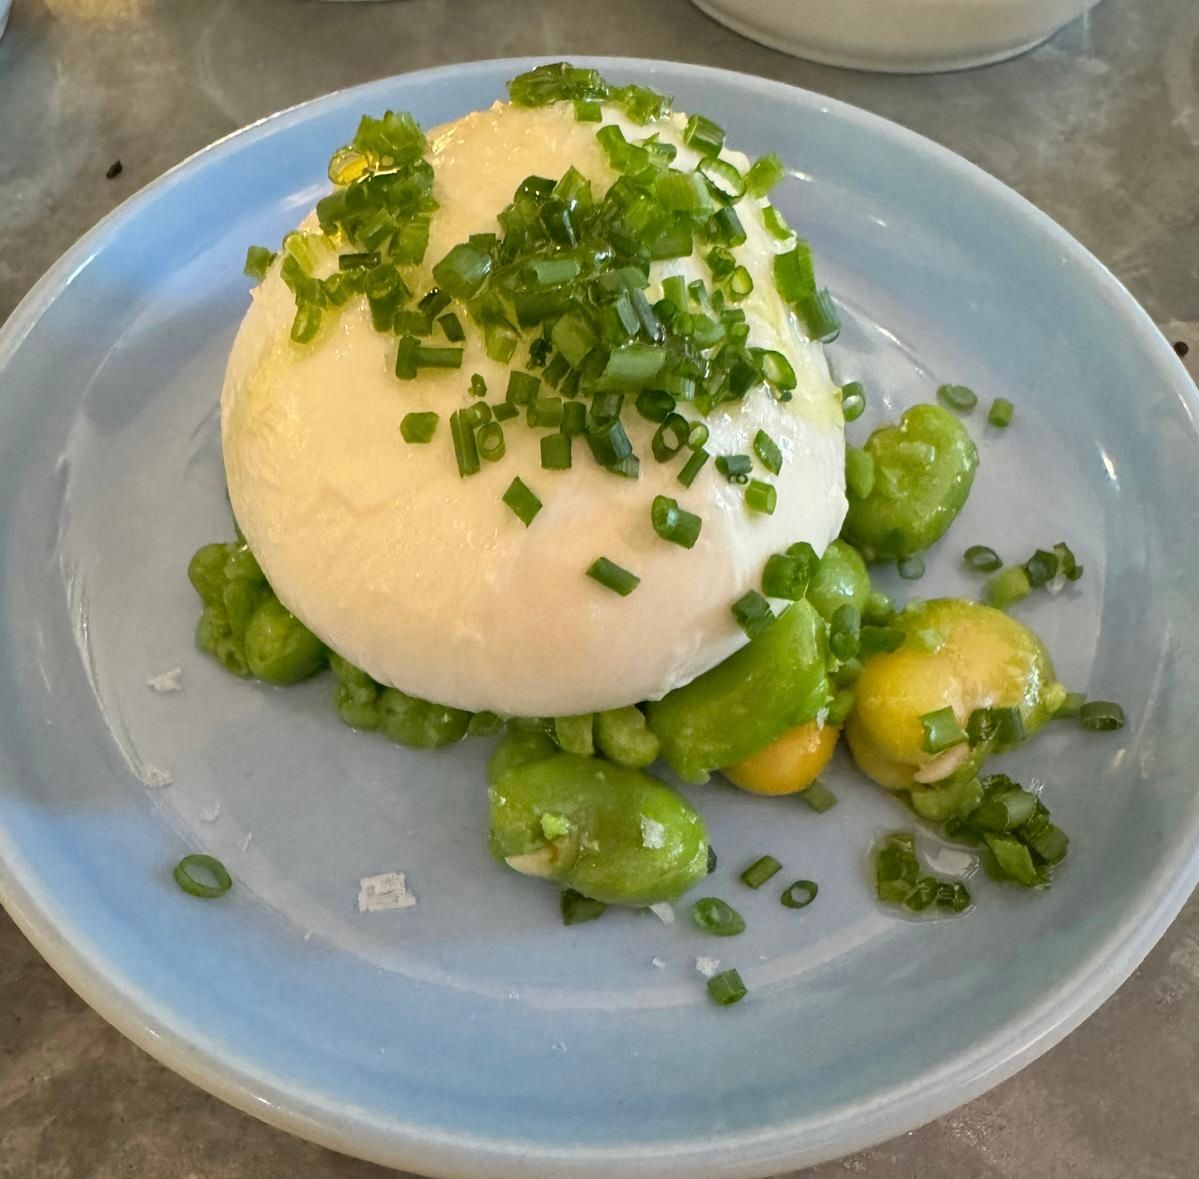 Burrata with peas and long beans